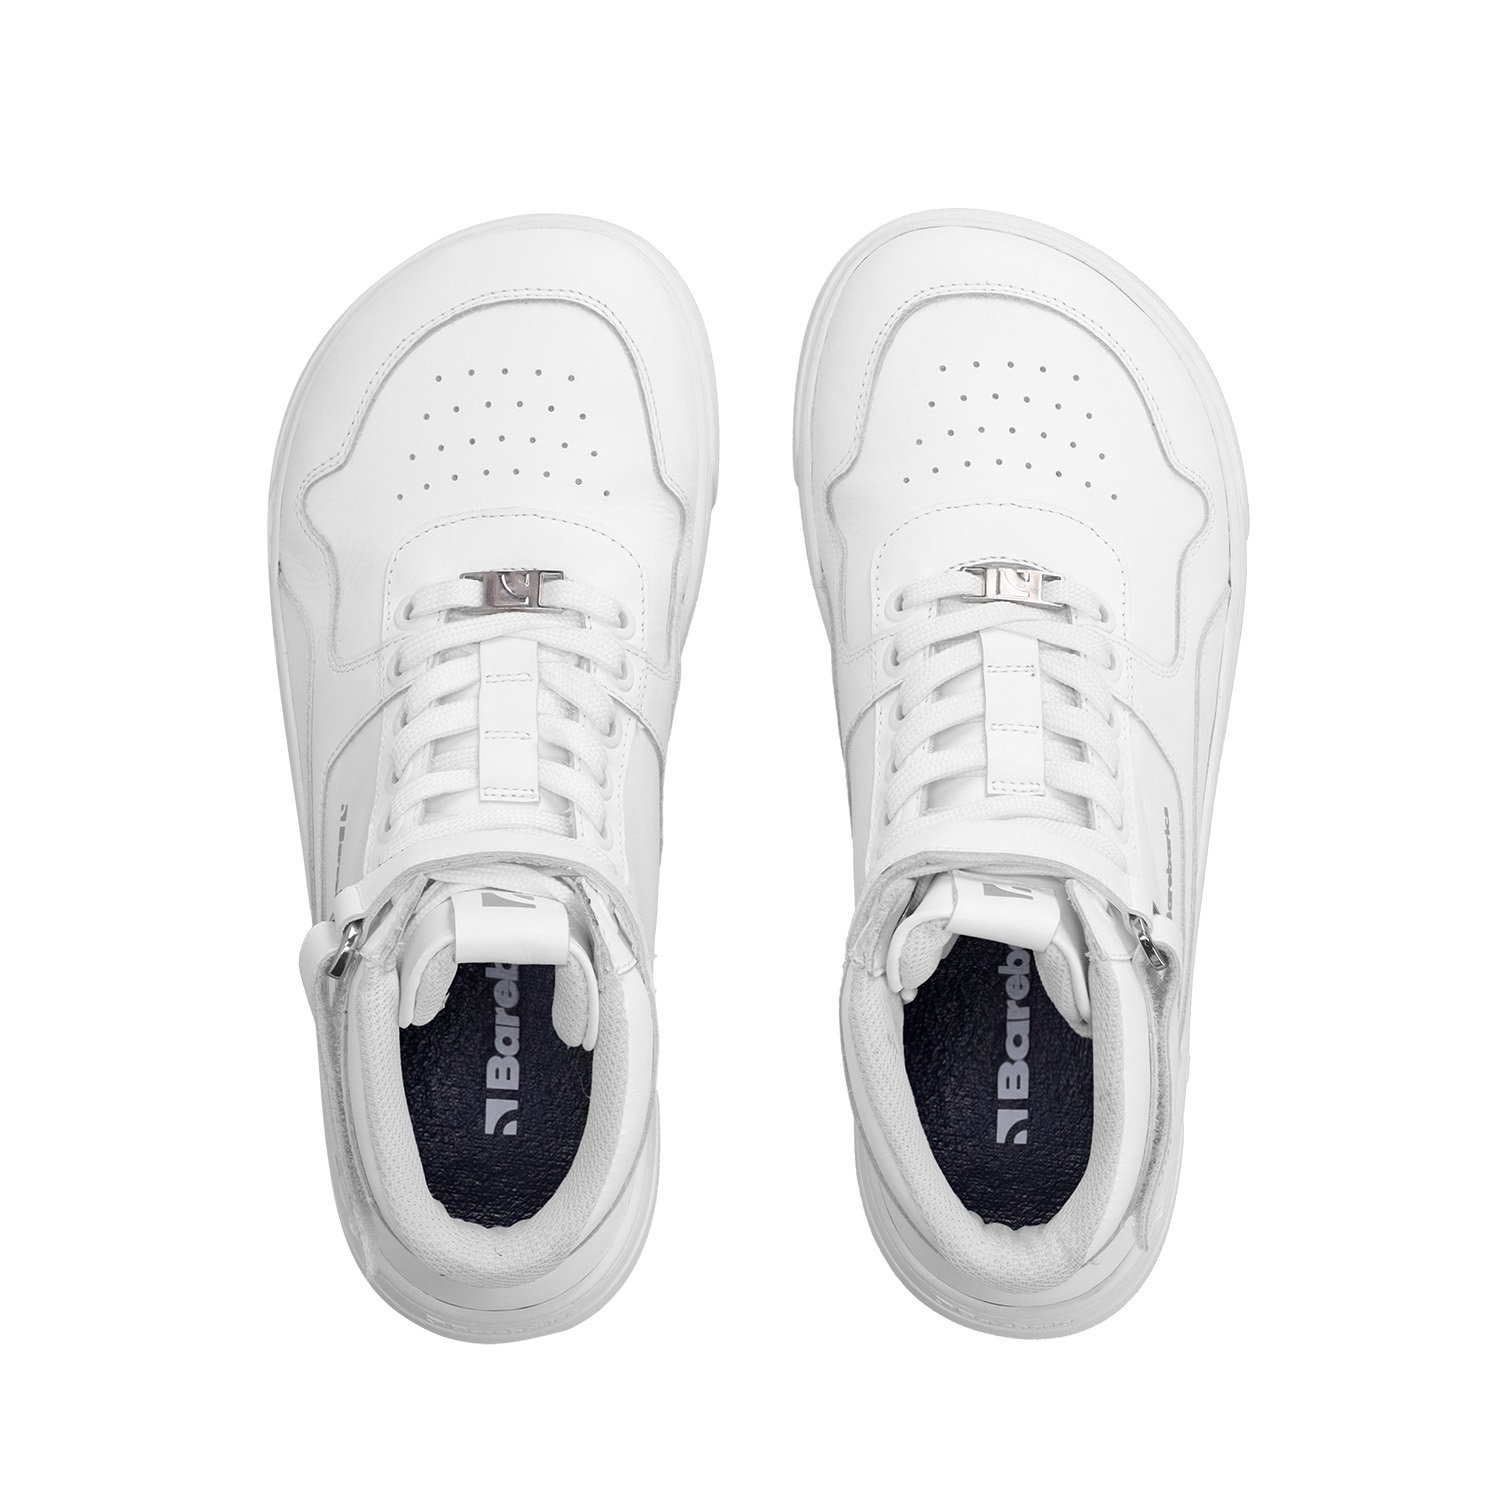 Barefoot Sneakers Barebarics Zing - High Top - All White - Leather ...